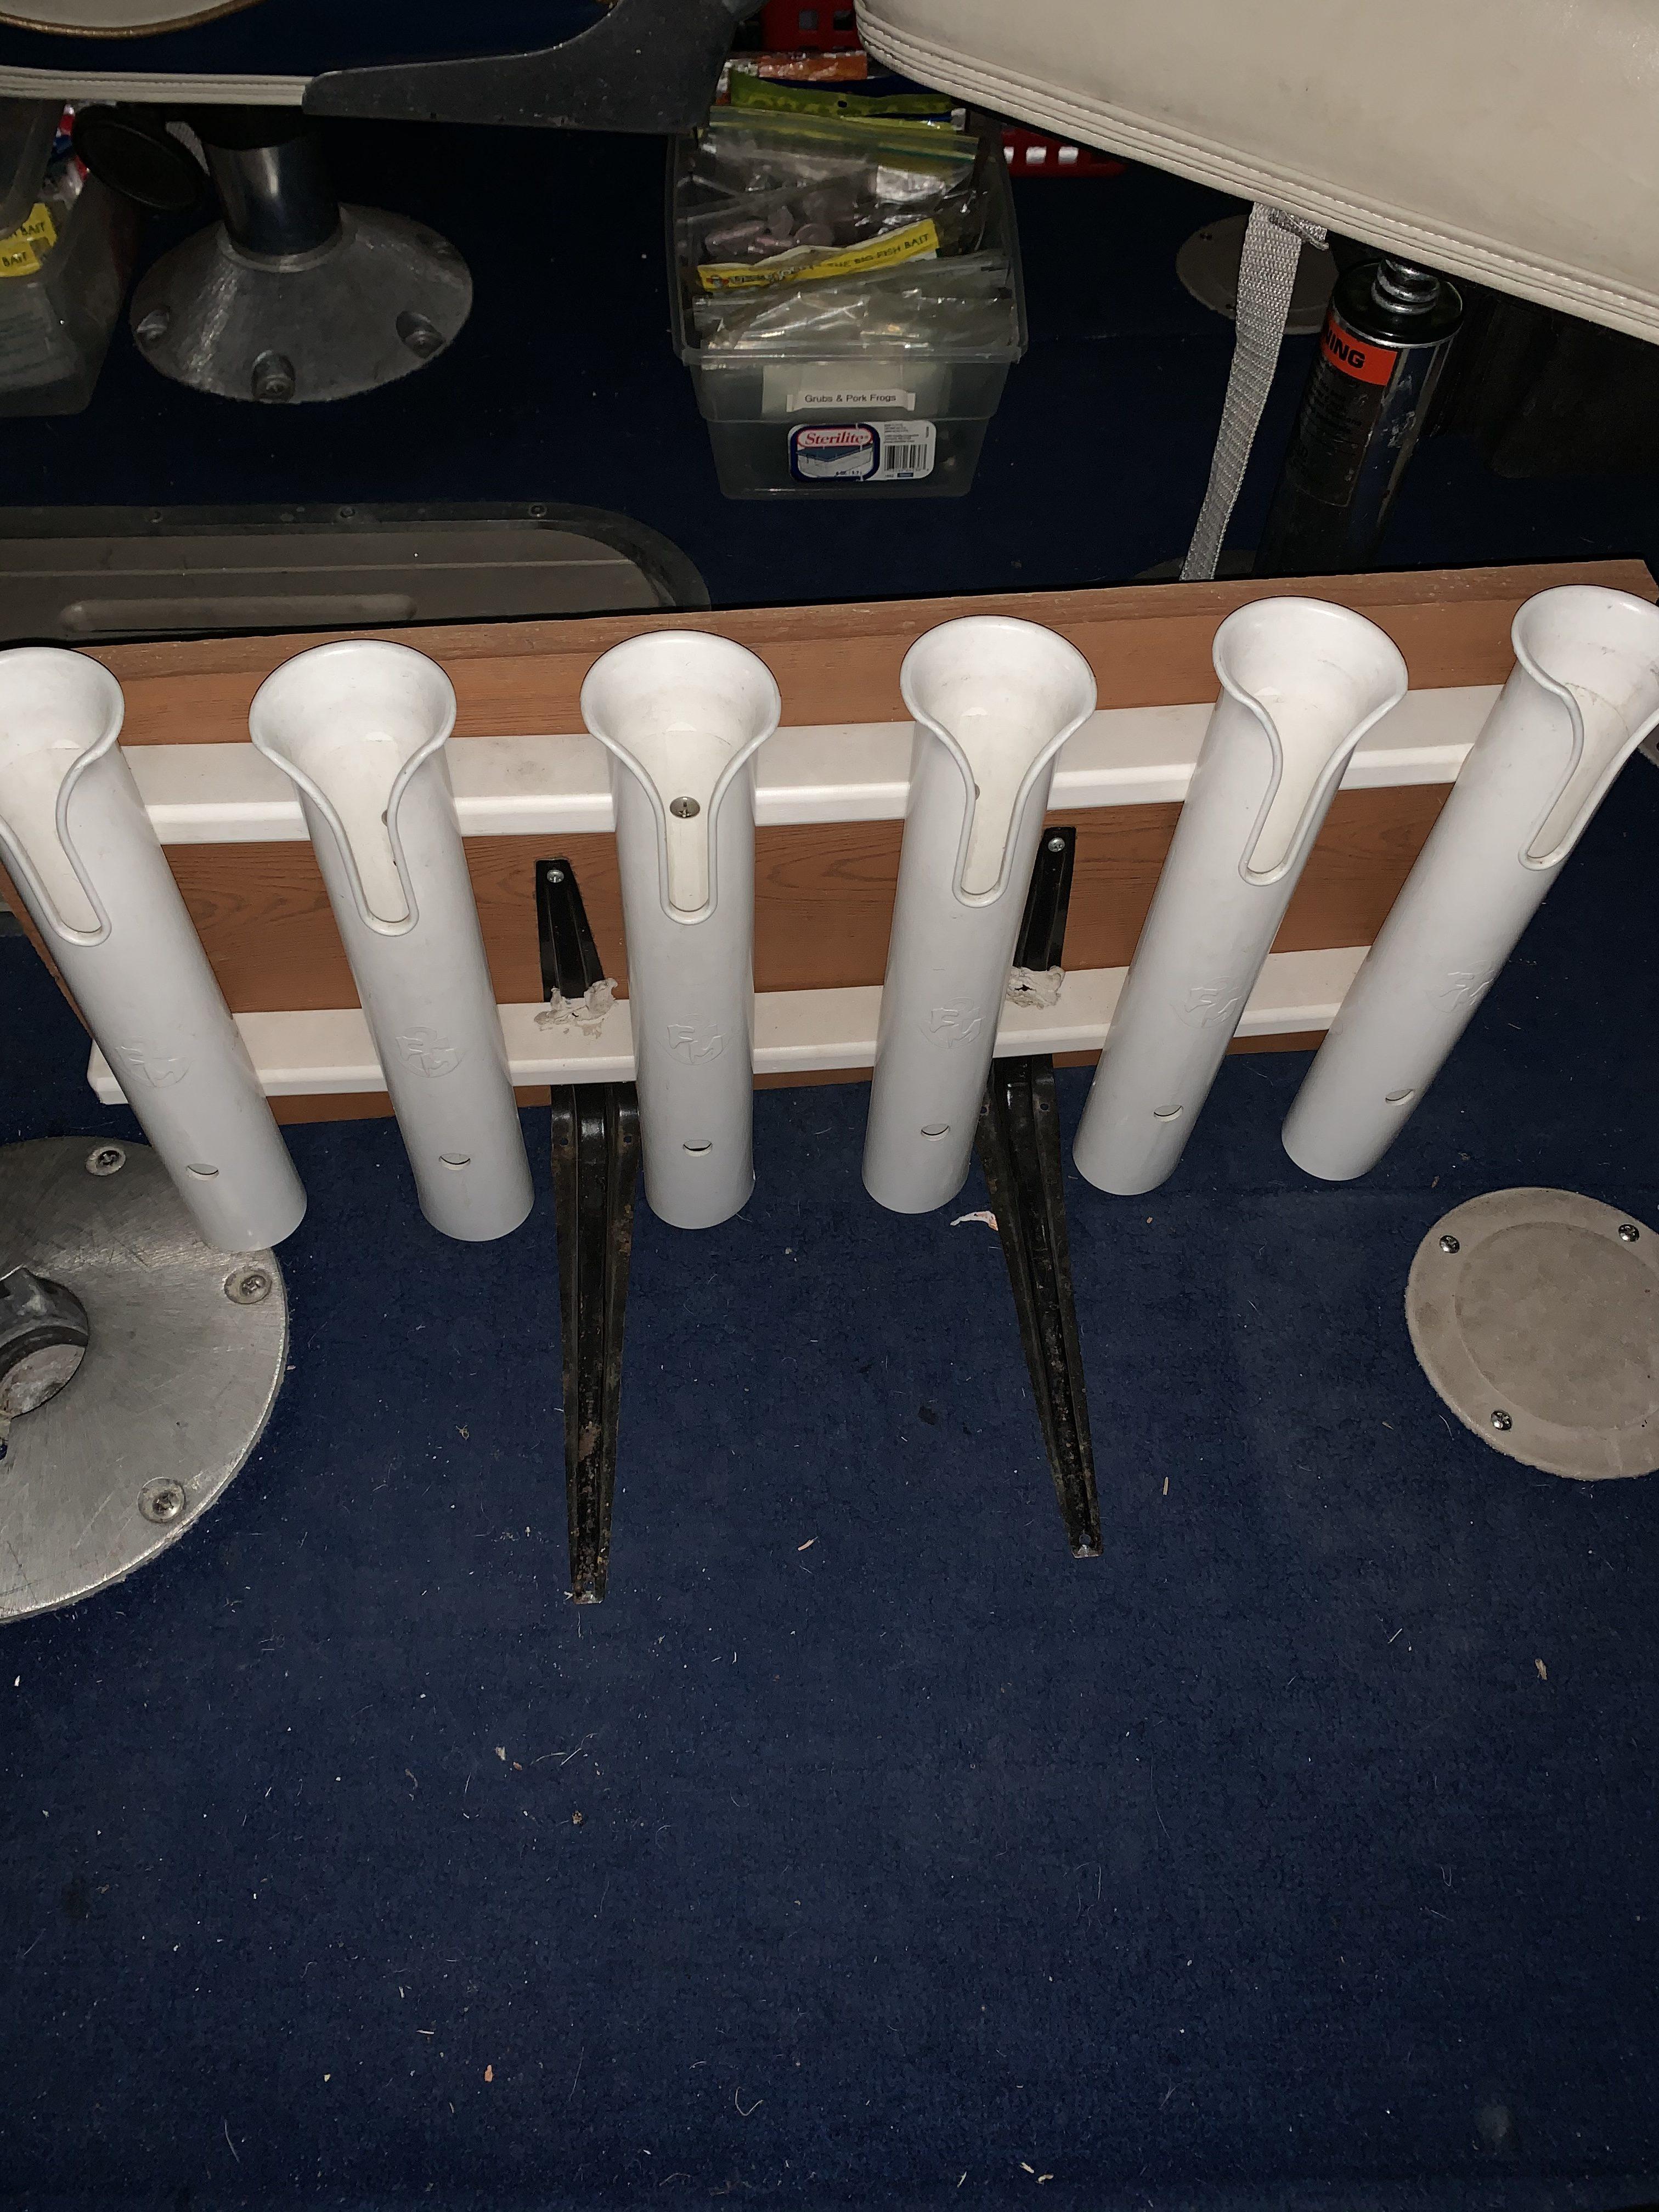 garage rod holders - Page 2 - The Hull Truth - Boating and Fishing Forum